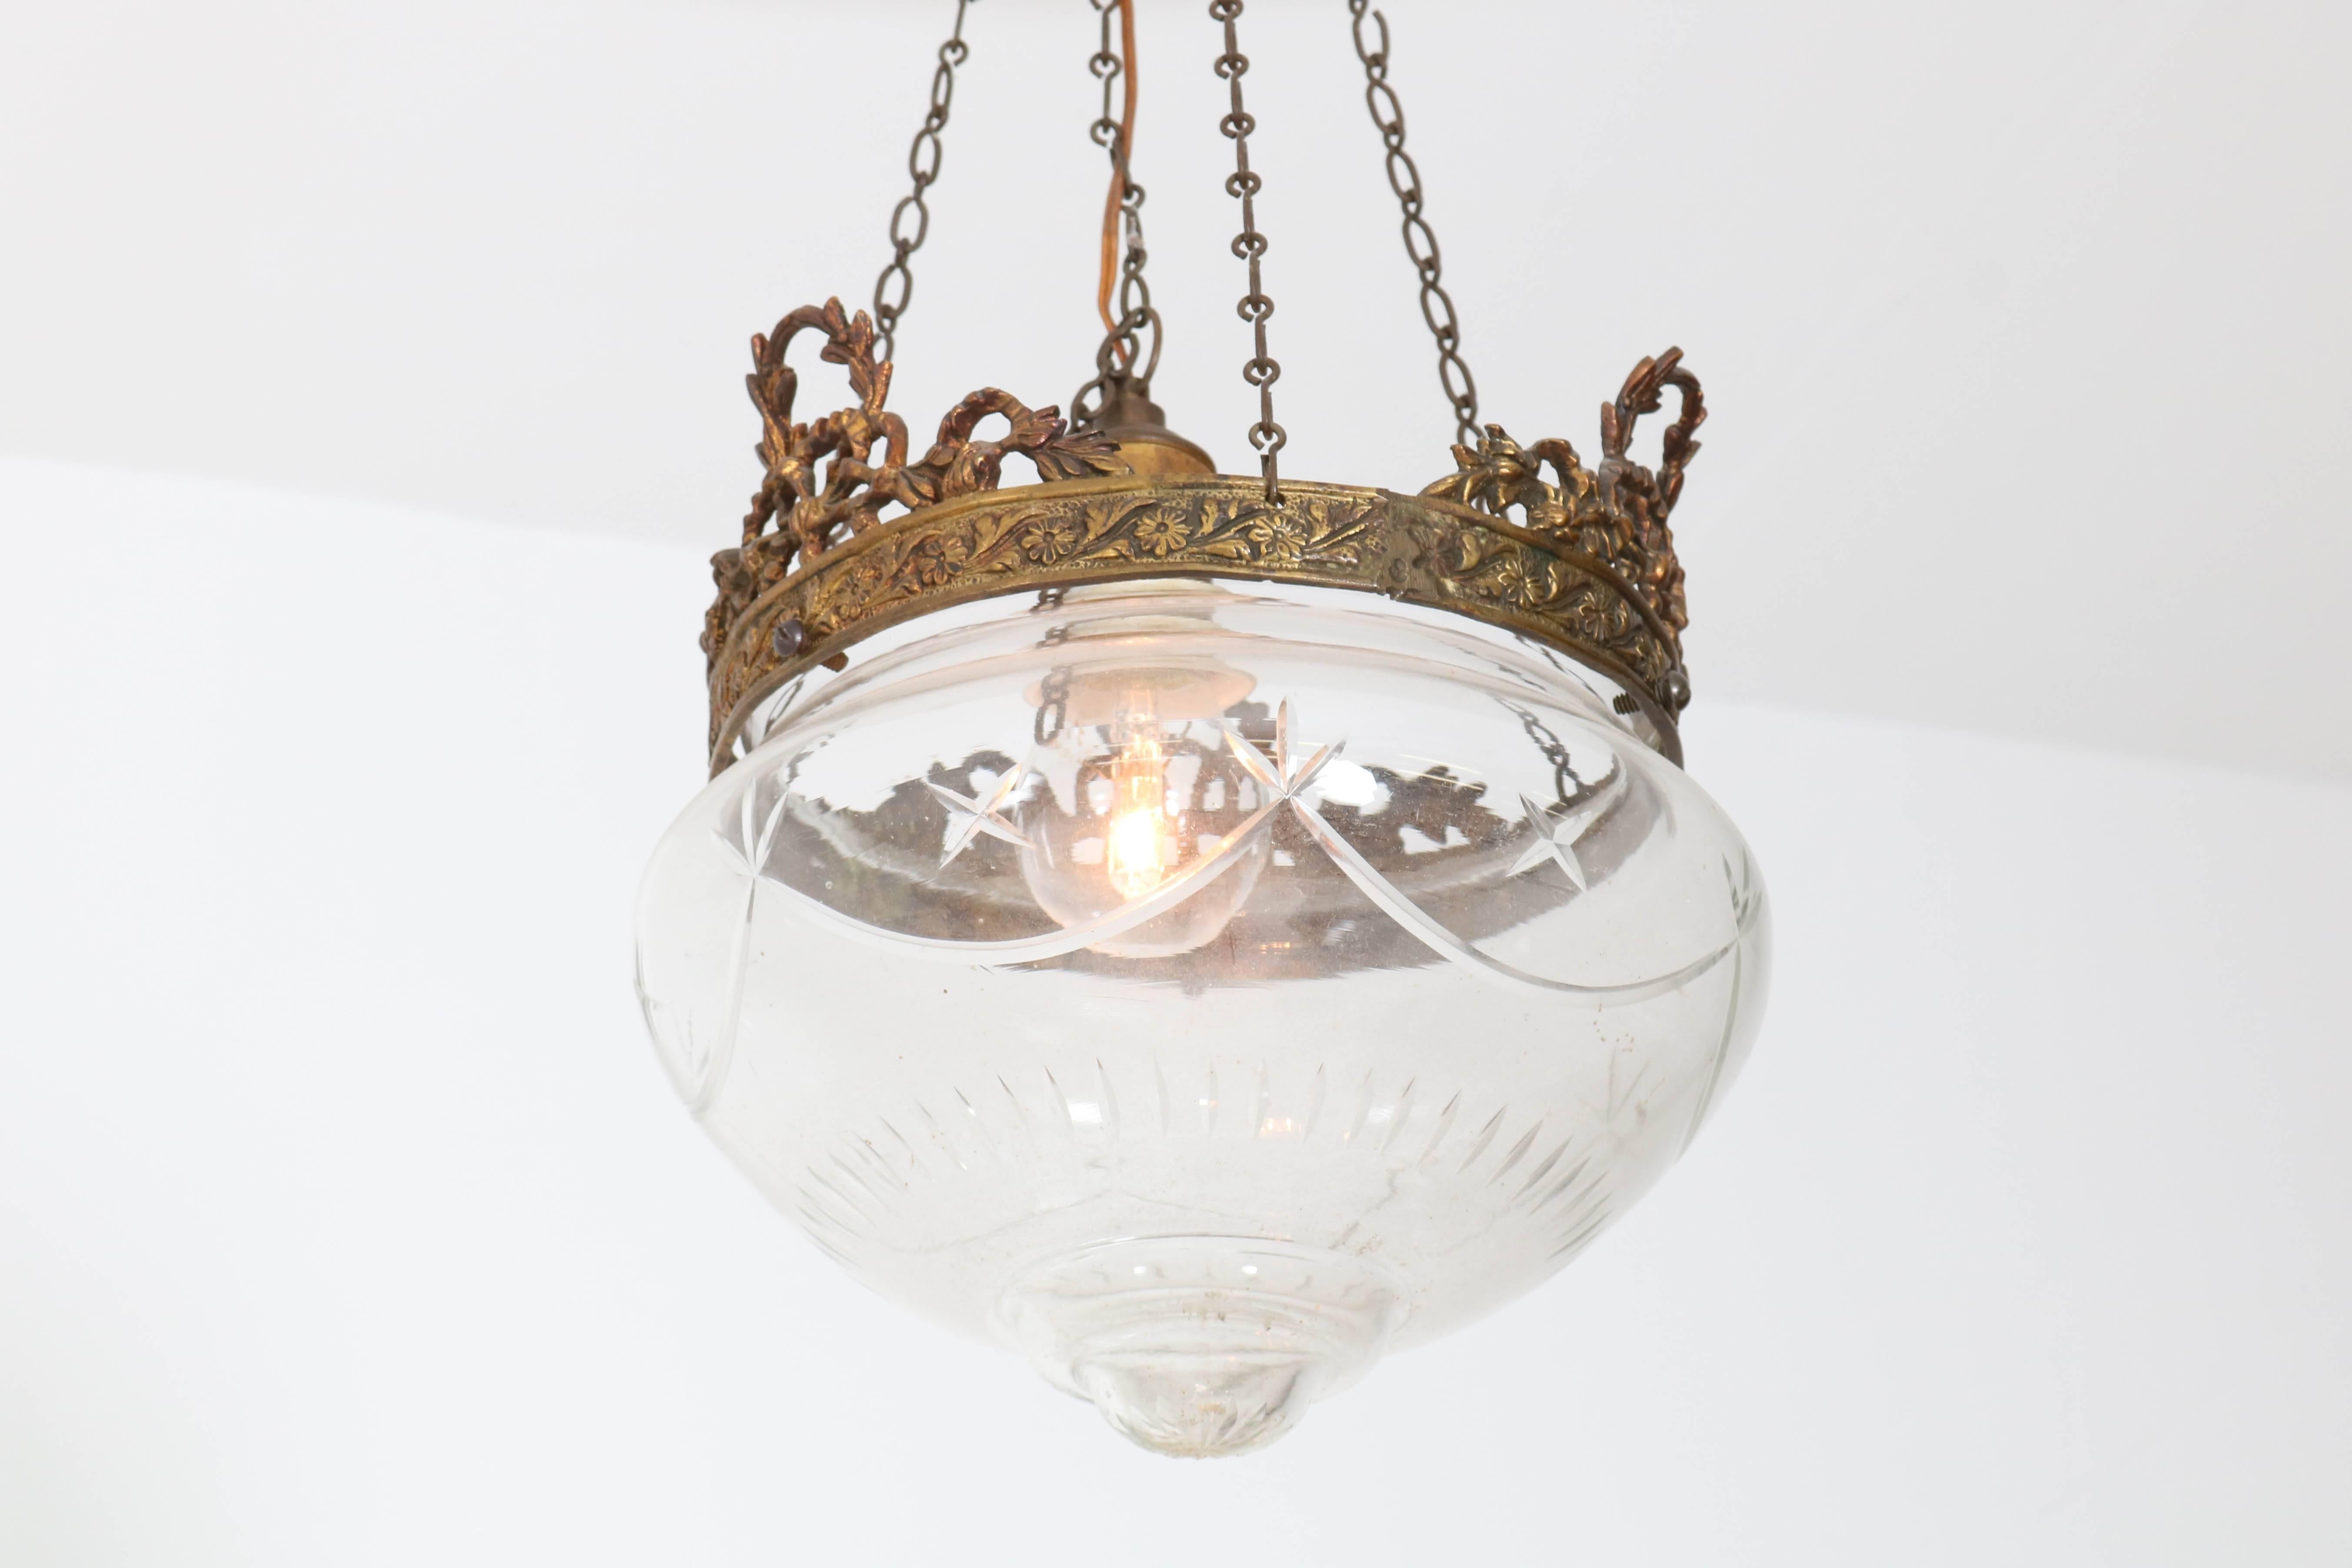 Offered by Amsterdam Modernism:
Stunning French Art Nouveau hall lamp, 1900s.
Brass frame with original beveled glass shade.
In good original condition with minor wear consistent with age and use,
preserving a beautiful patina.